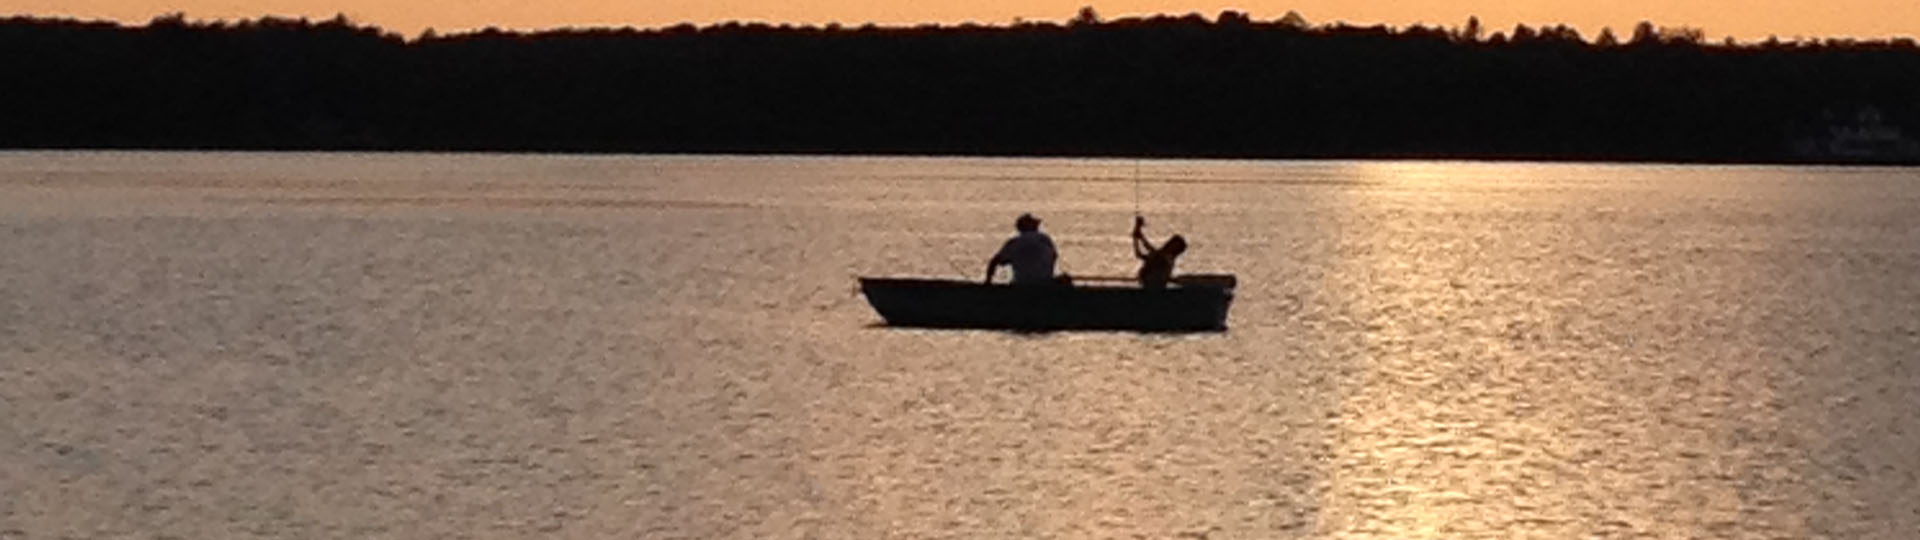 Keith Smith and his grandson fishing during a Upper Michigan sunset